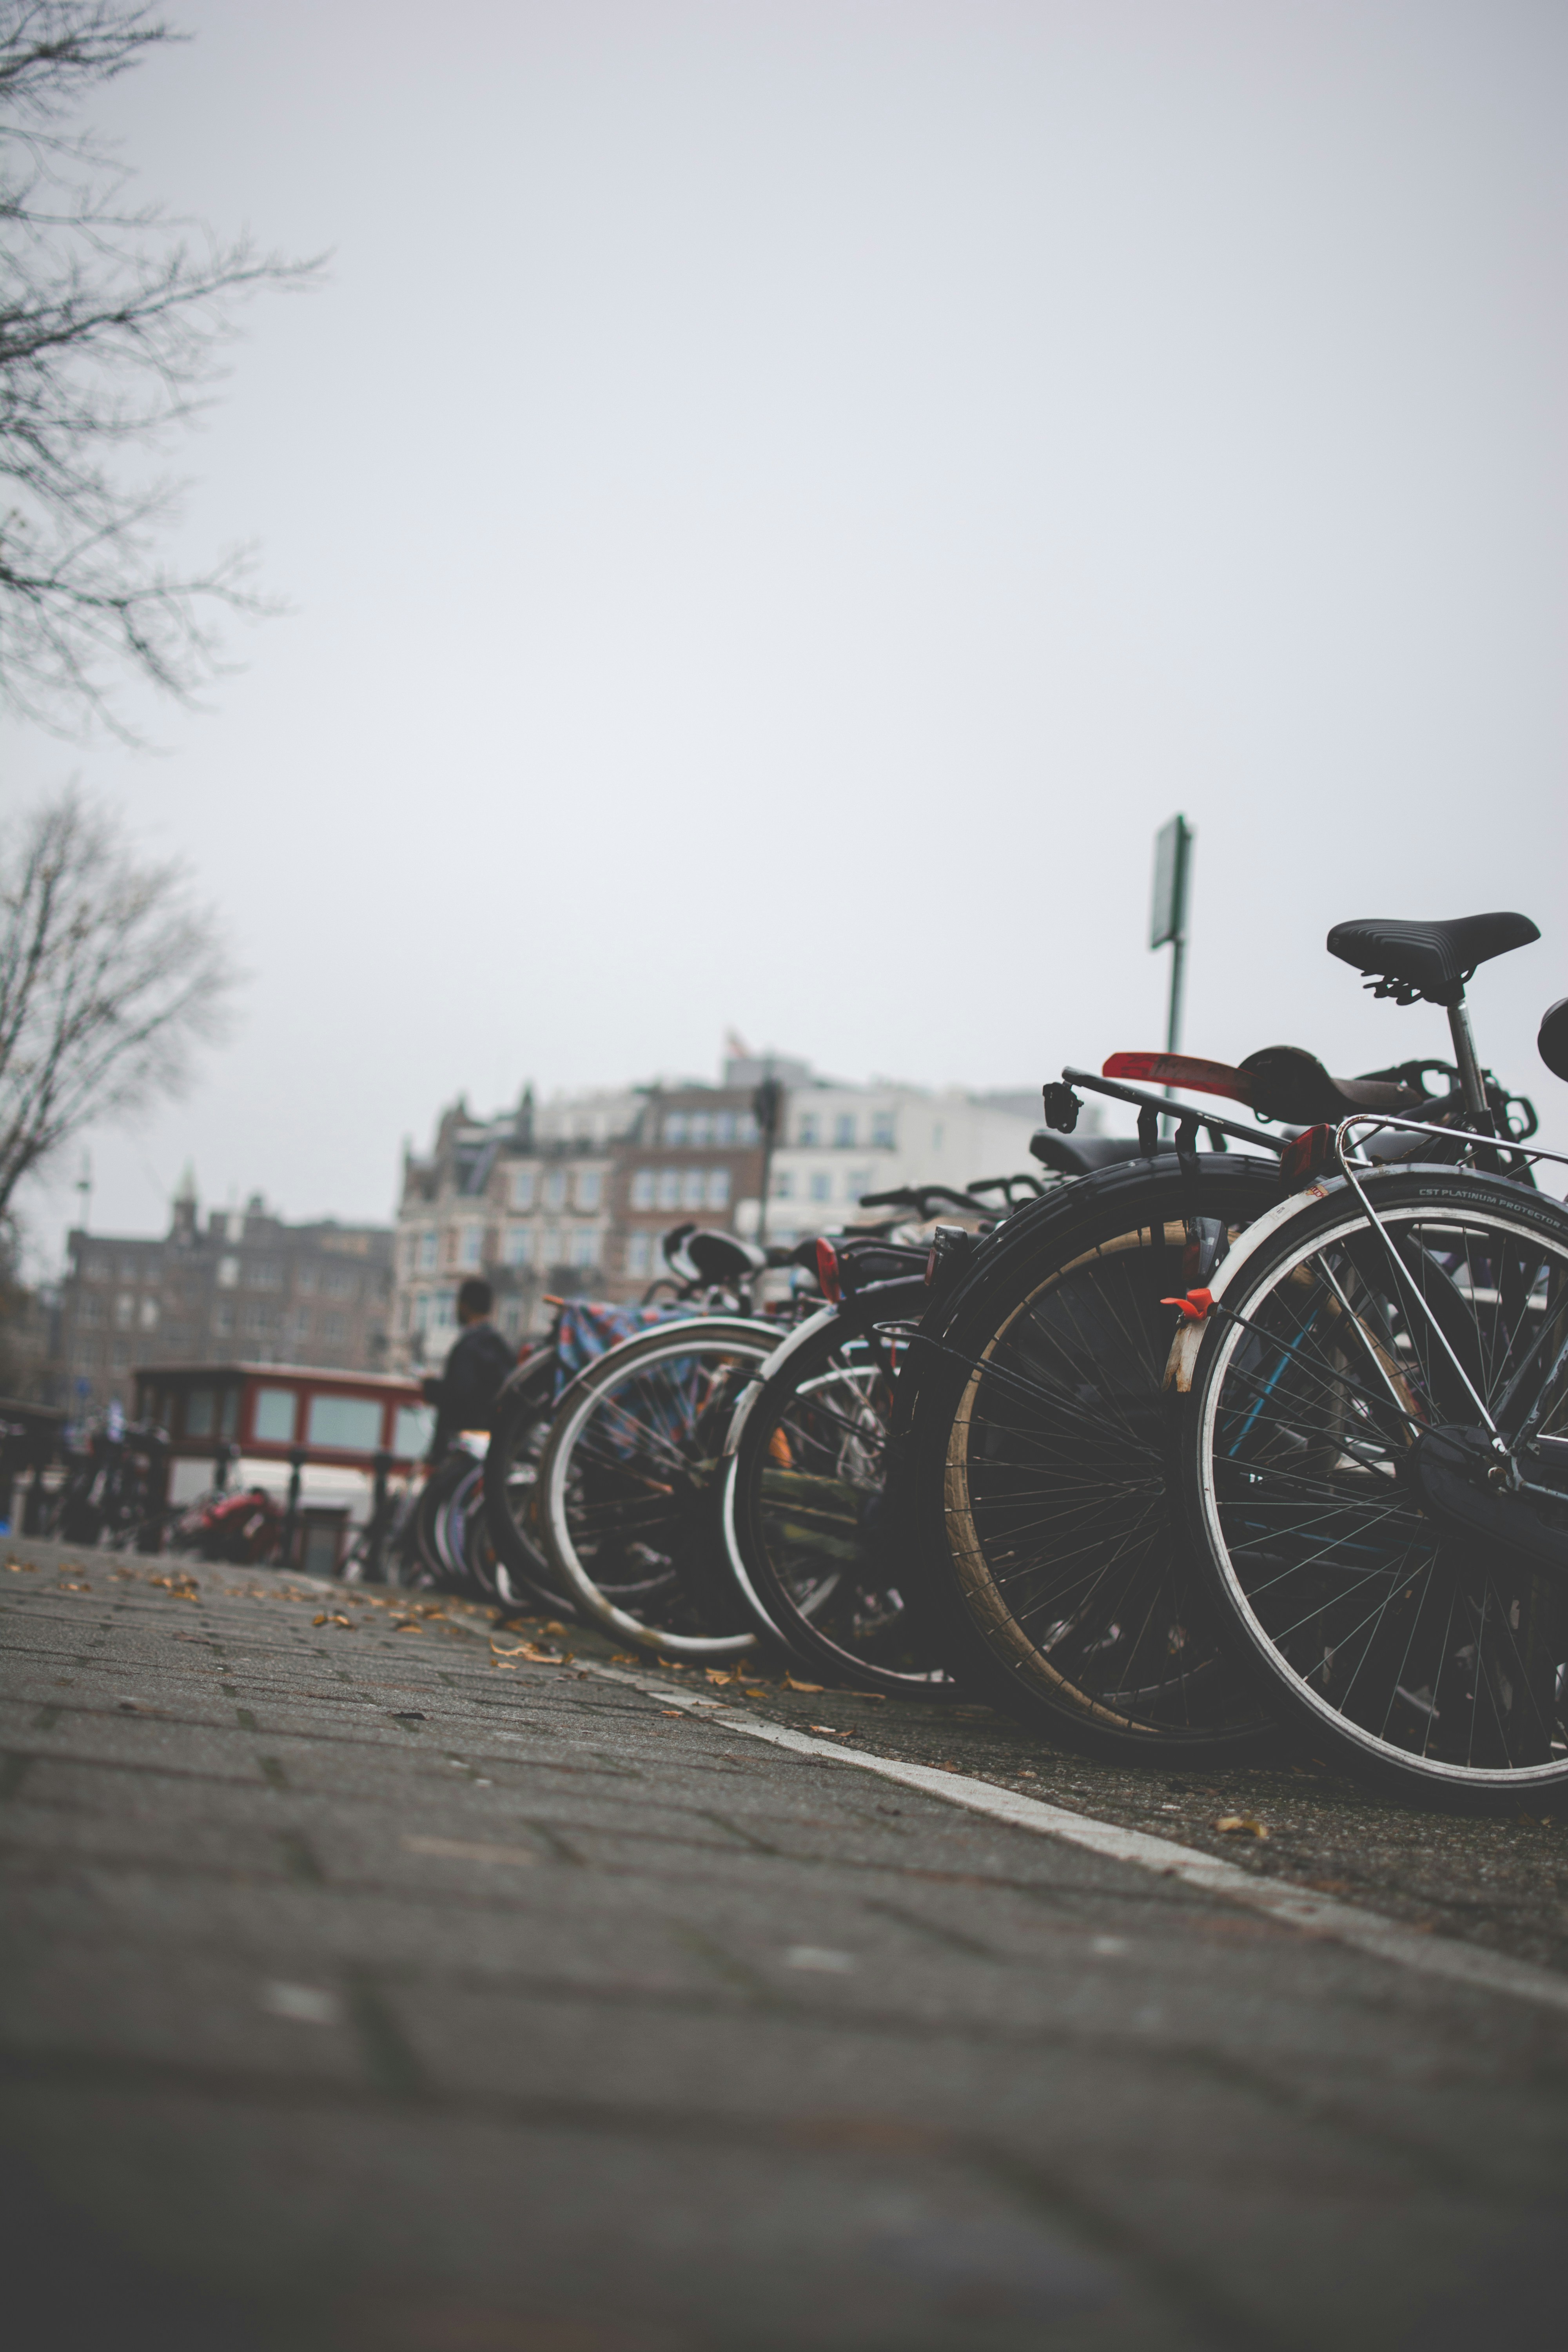 Parked bicycles in Amsterdam